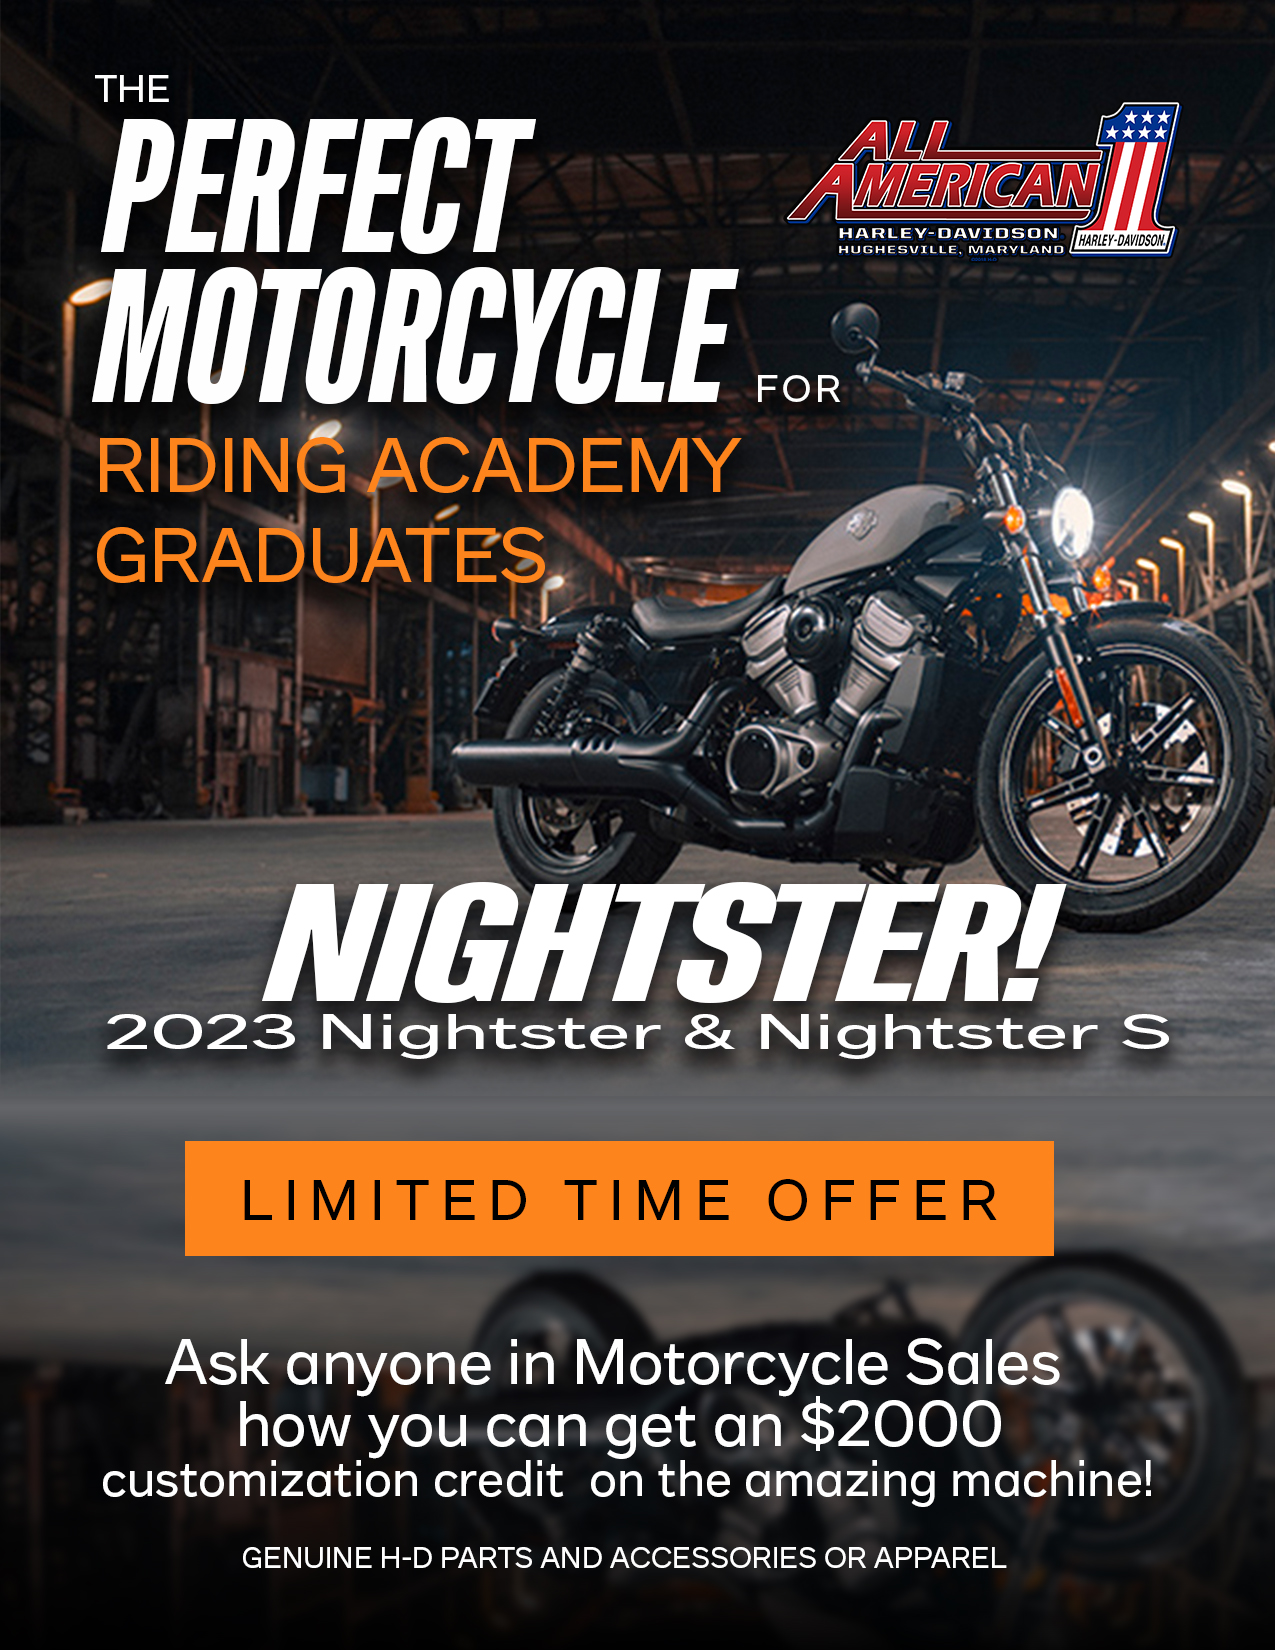 Visit us today to discover exclusive offers available for YOU as an All American Riding Academy graduate. Inquire with a sales associate for more information.